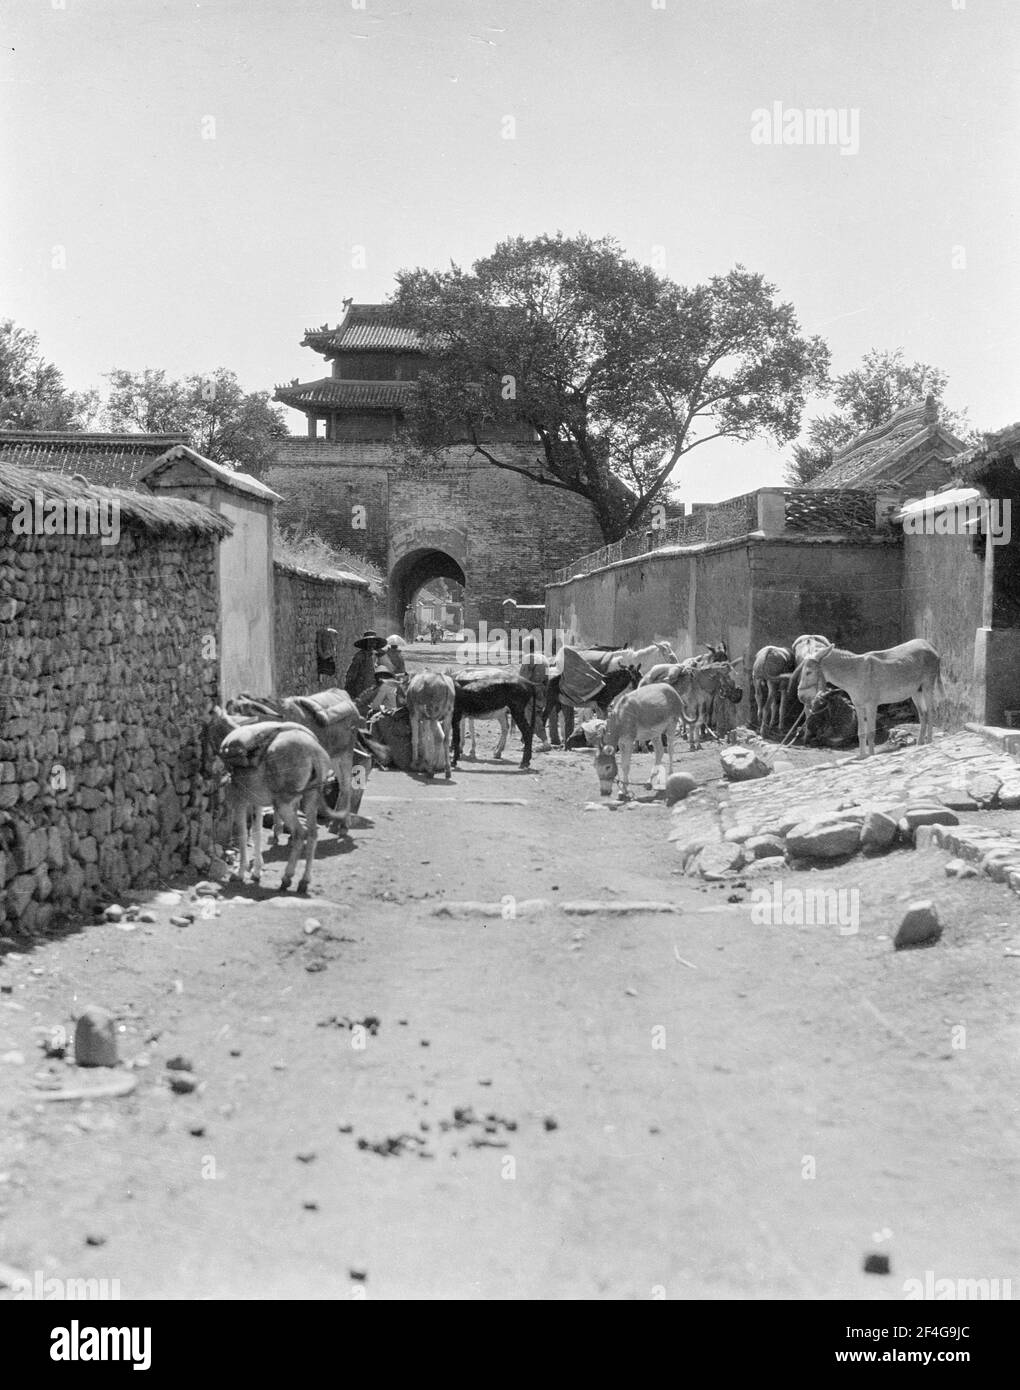 City Gate and Donkeys, China, Rehe Sheng (China), Hebei Sheng (China), 1924. From the Sidney D. Gamble photographs collection. () Stock Photo